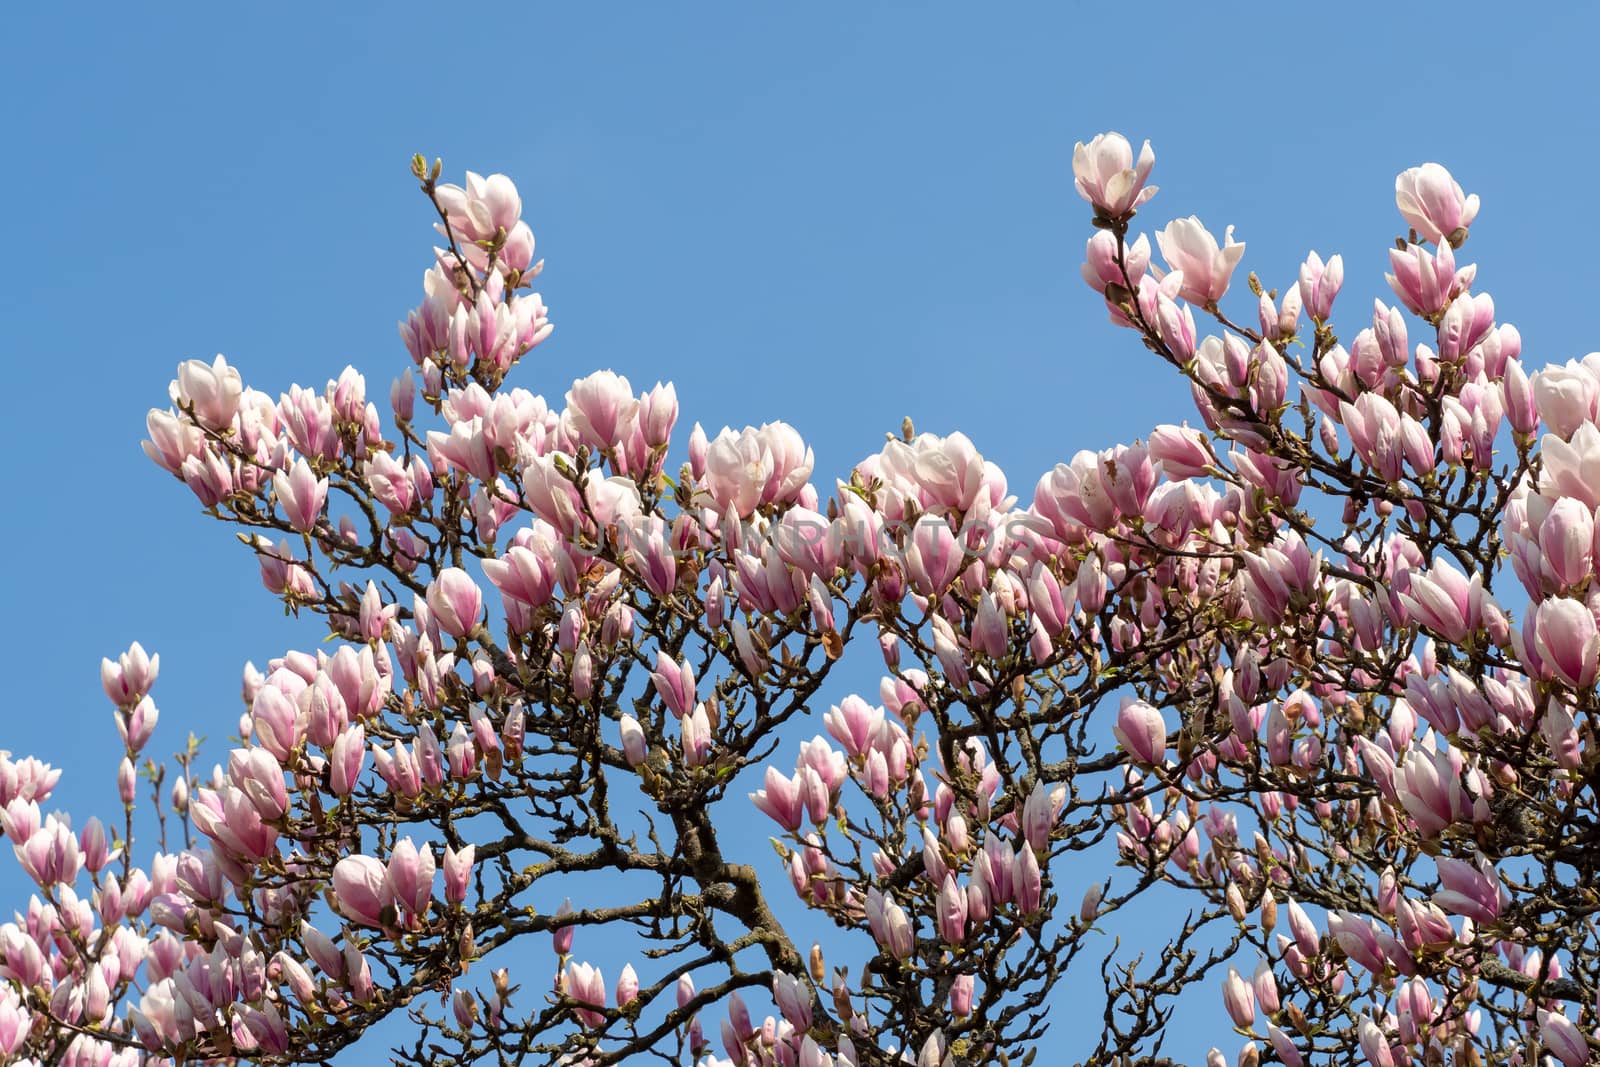 Magnolia pink blossom tree flowers over blue sky. Spring floral  by xtrekx